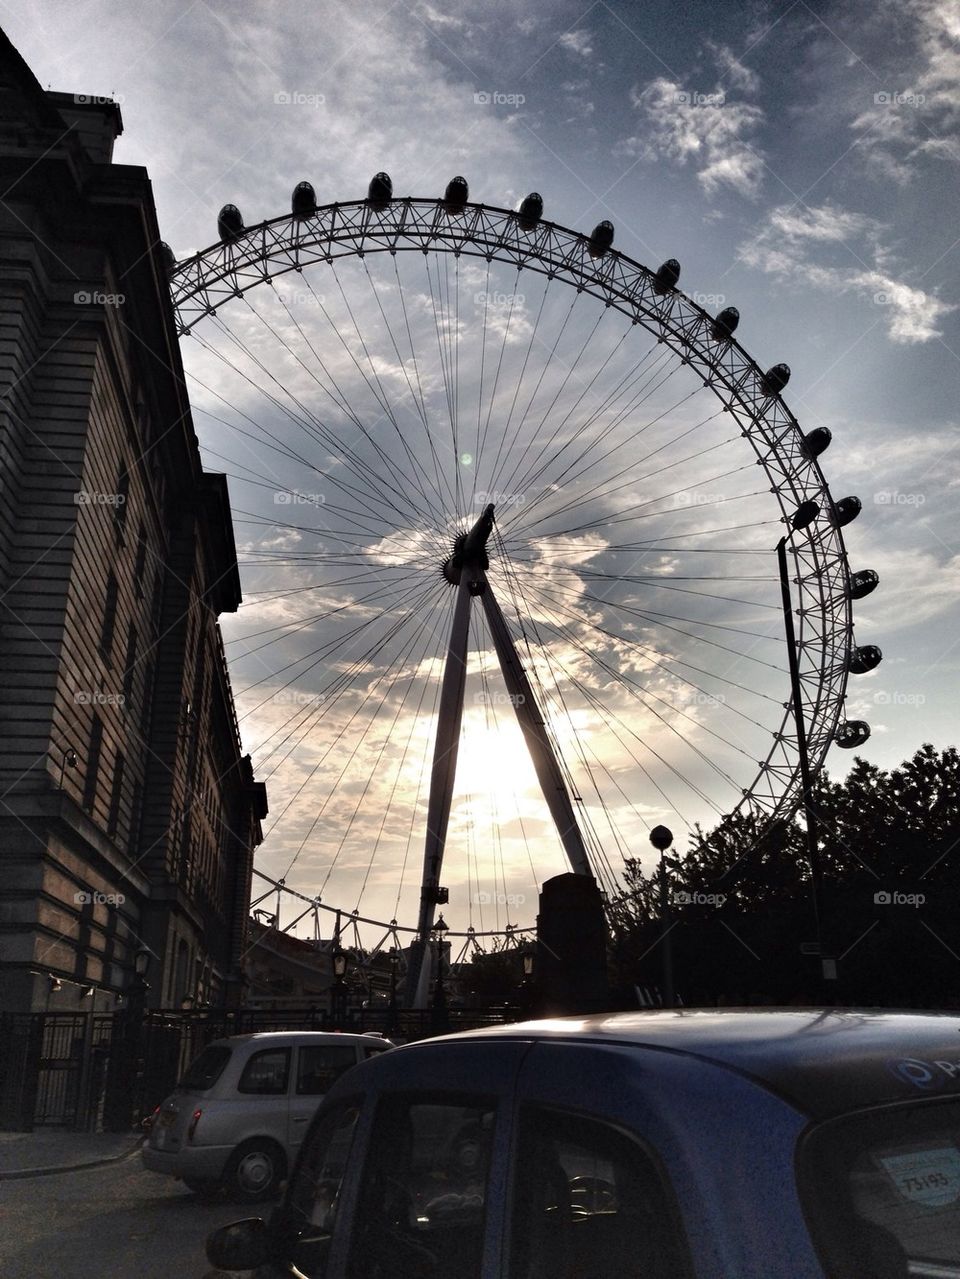 And evening in London by the eye.